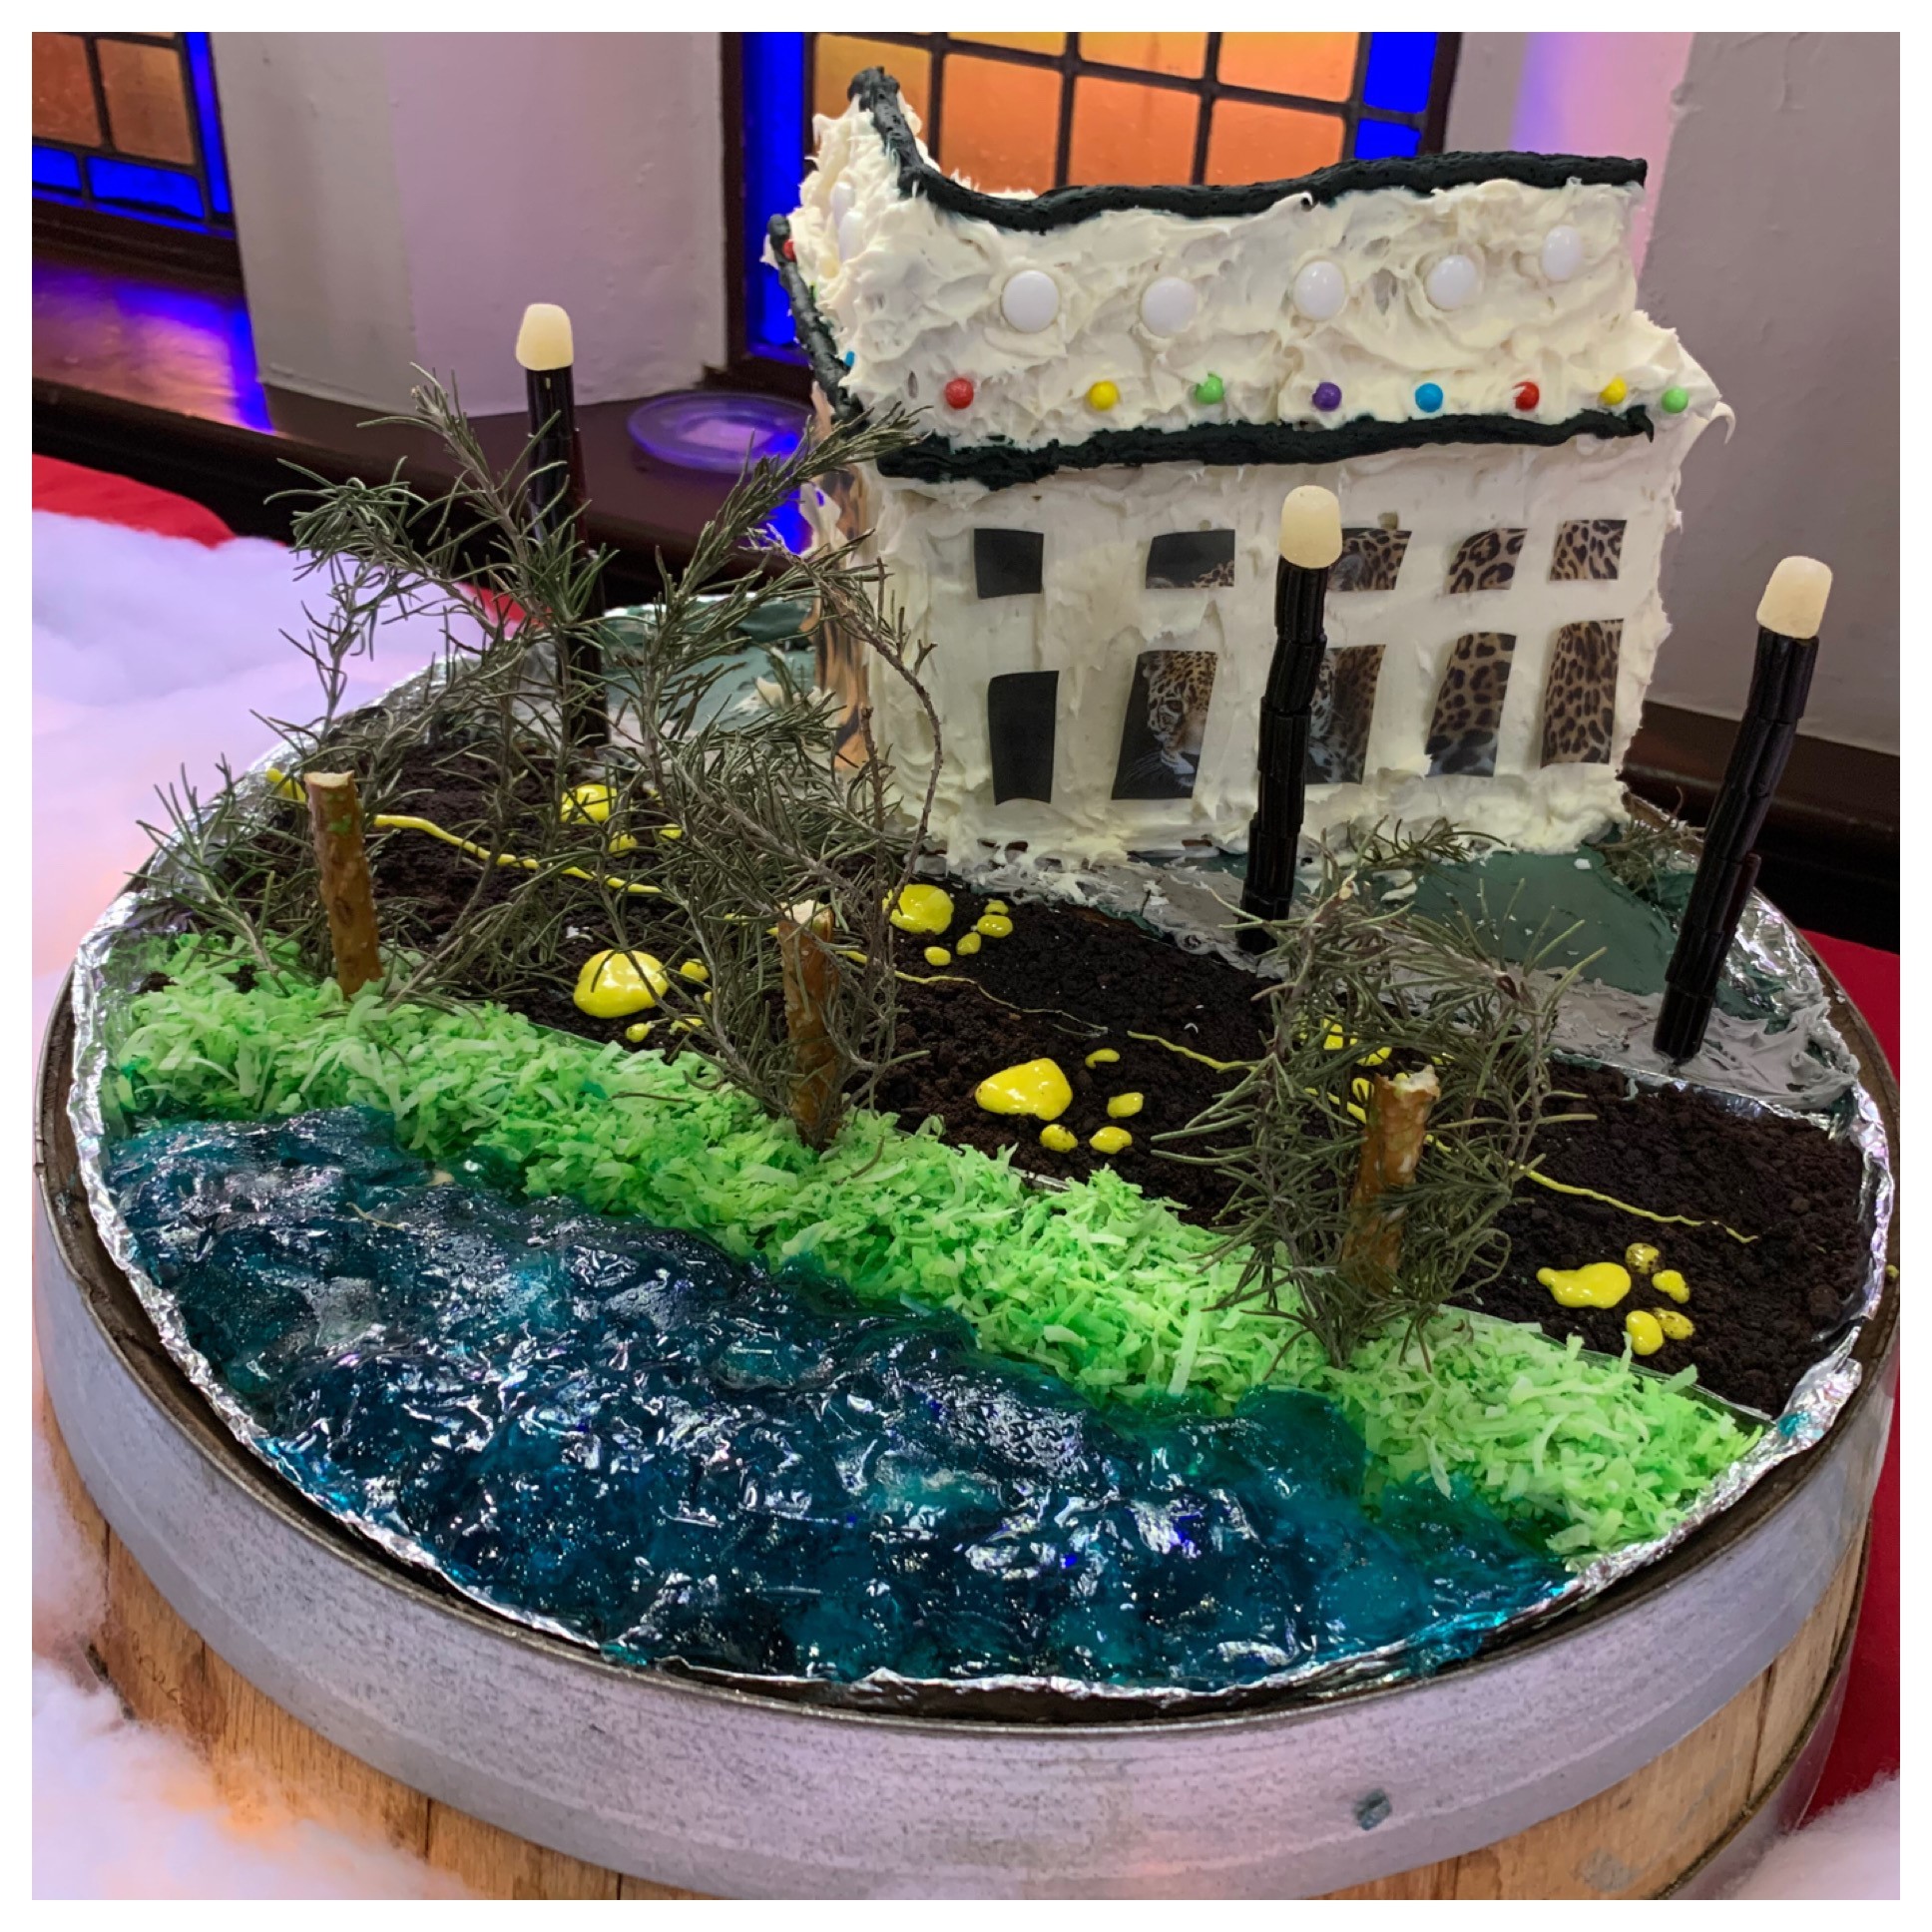 The Downtown Council’s entry in the Jacksonville Historical Society’s 2020 Gingerbread House Contest won the People’s Choice Award.